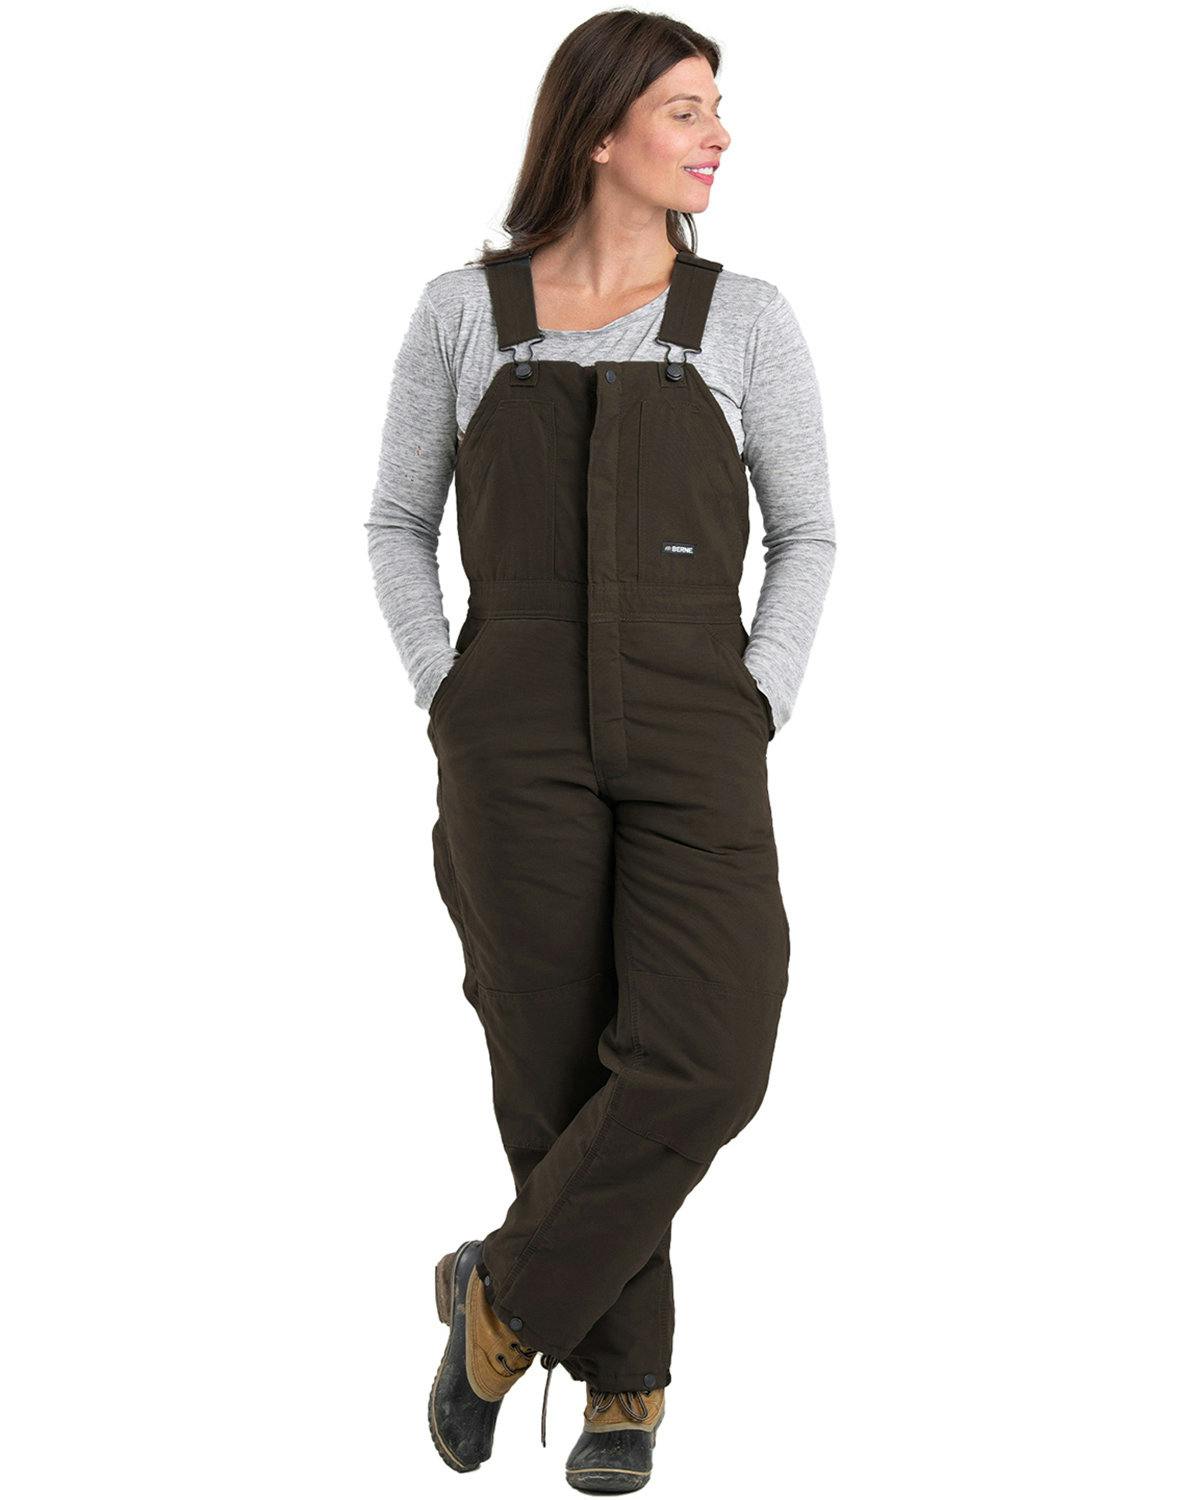 Image for Ladies' Softstone Duck Insulated Bib Overall